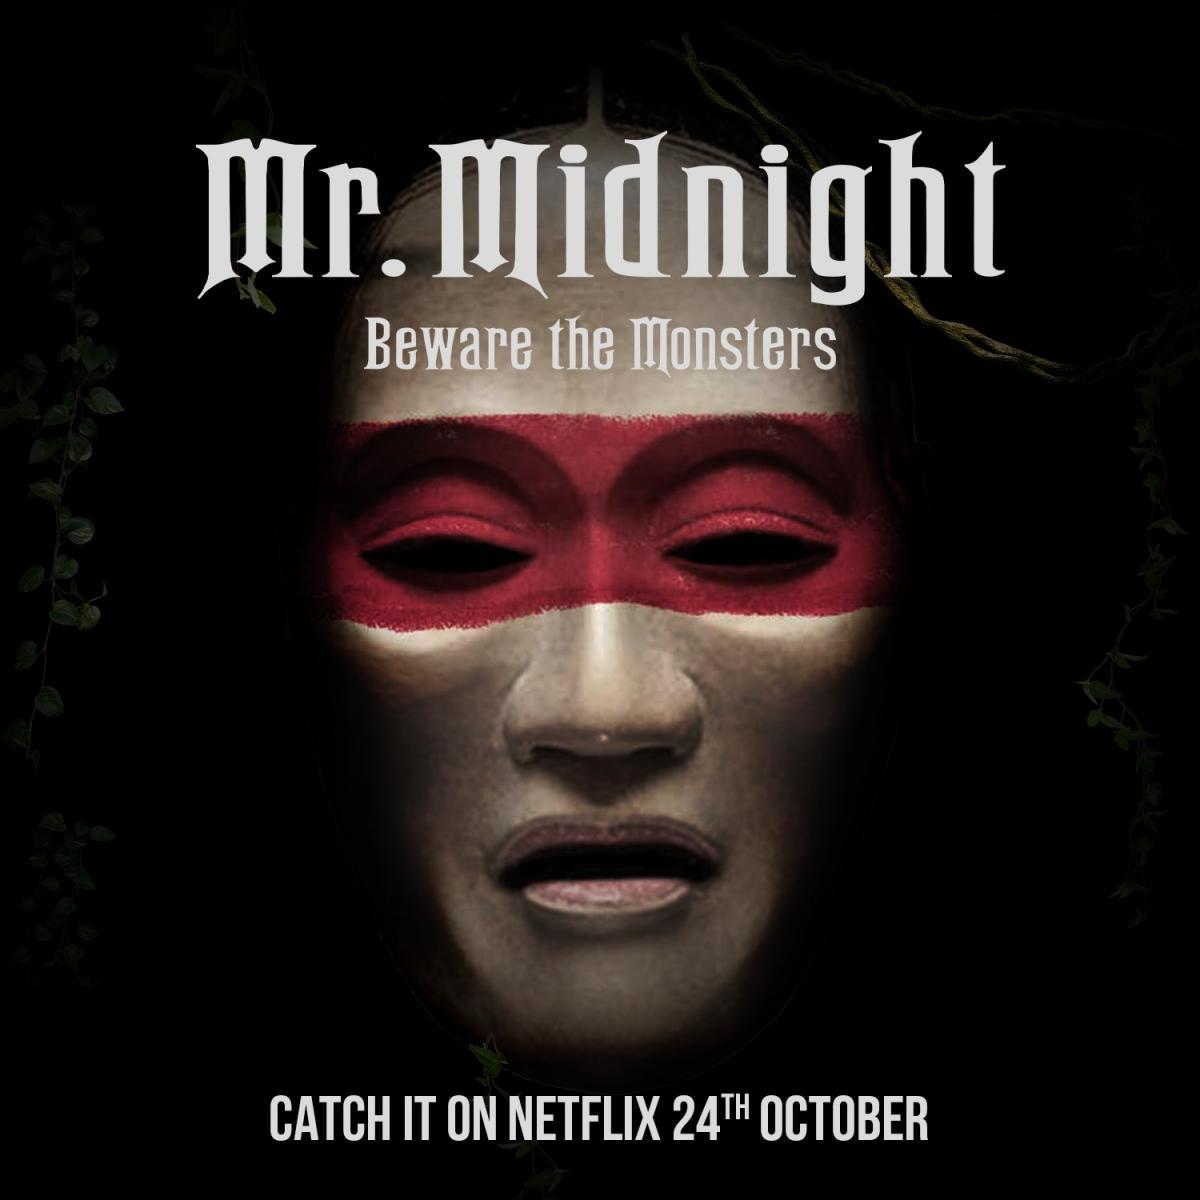 MR. MIDNIGHT: BEWARE THE MONSTERS (2022) S01 1080p NF WEB-DL DDP5.1 RETAIL NL Subs